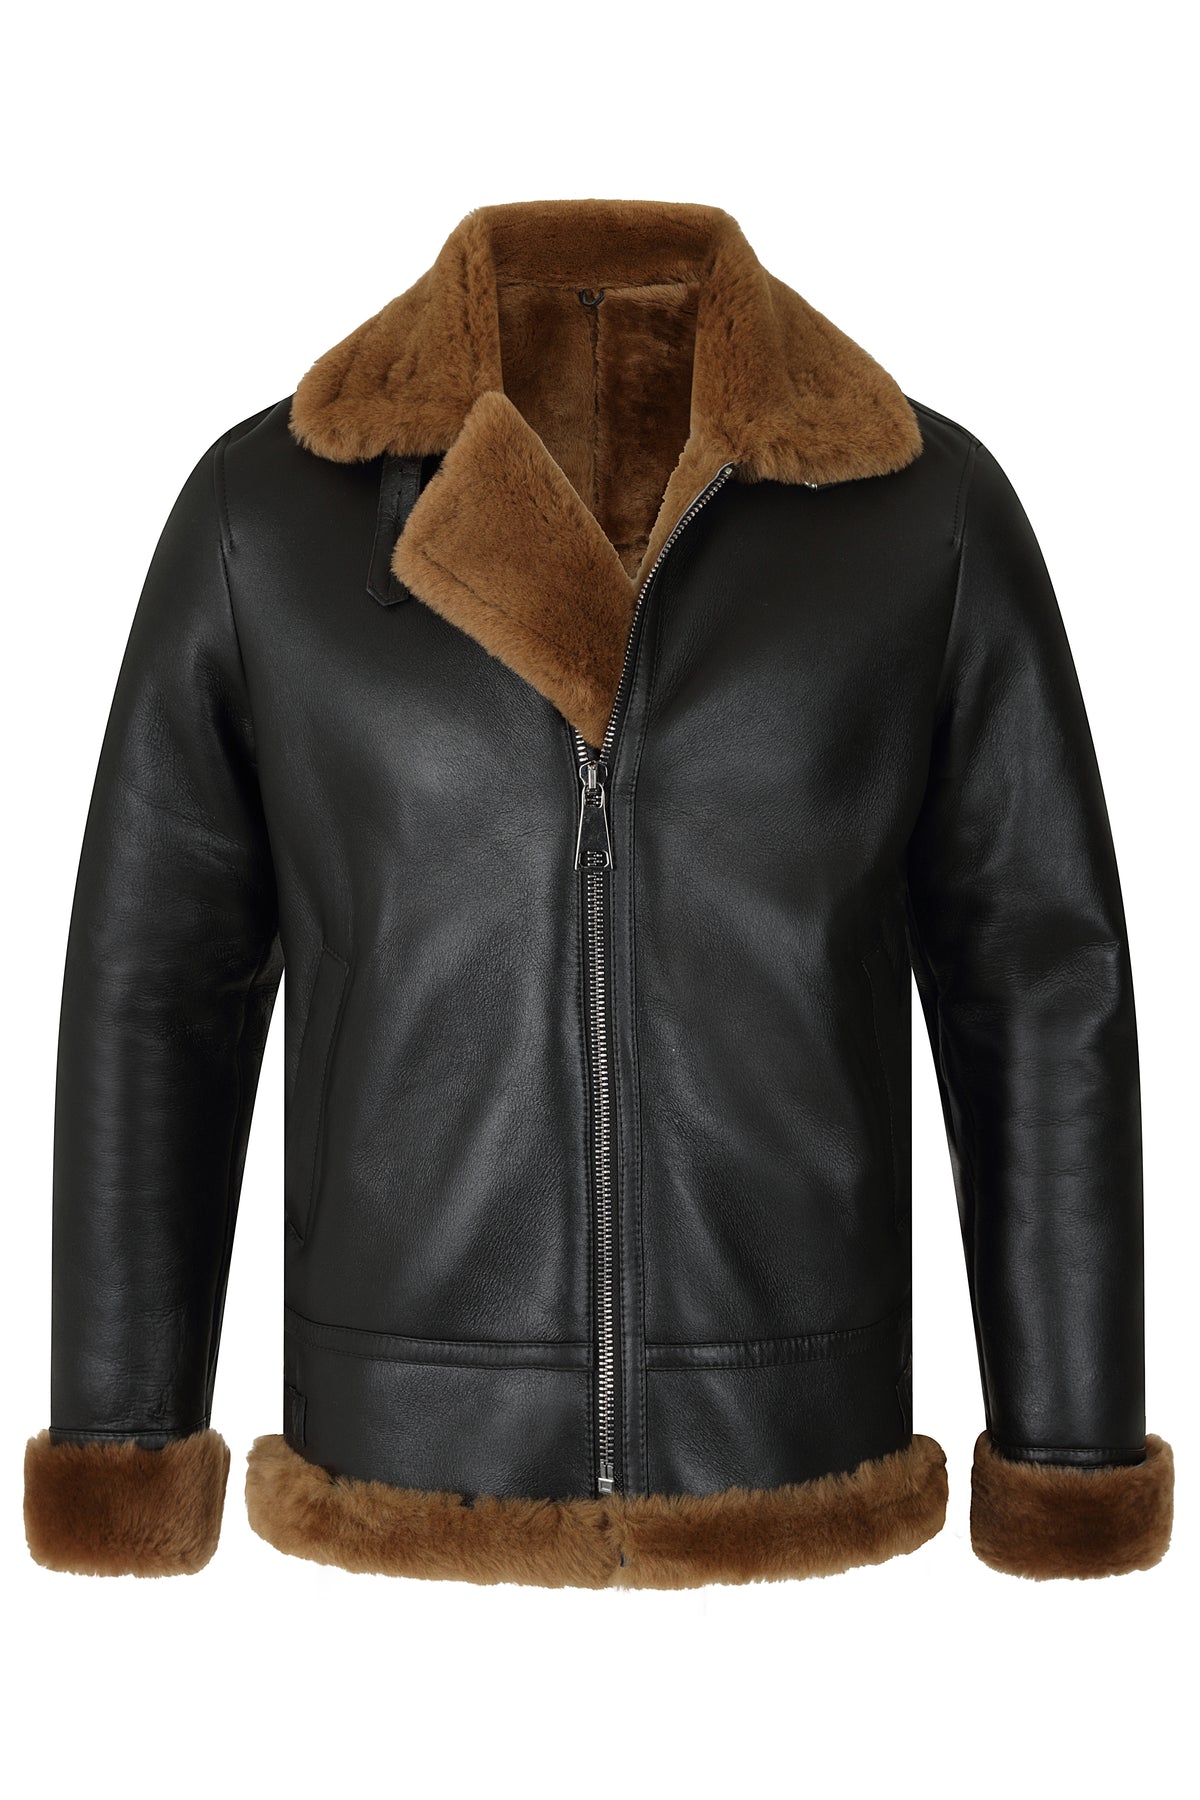 The Buckley | Toffee Shearling – Blake Hedley